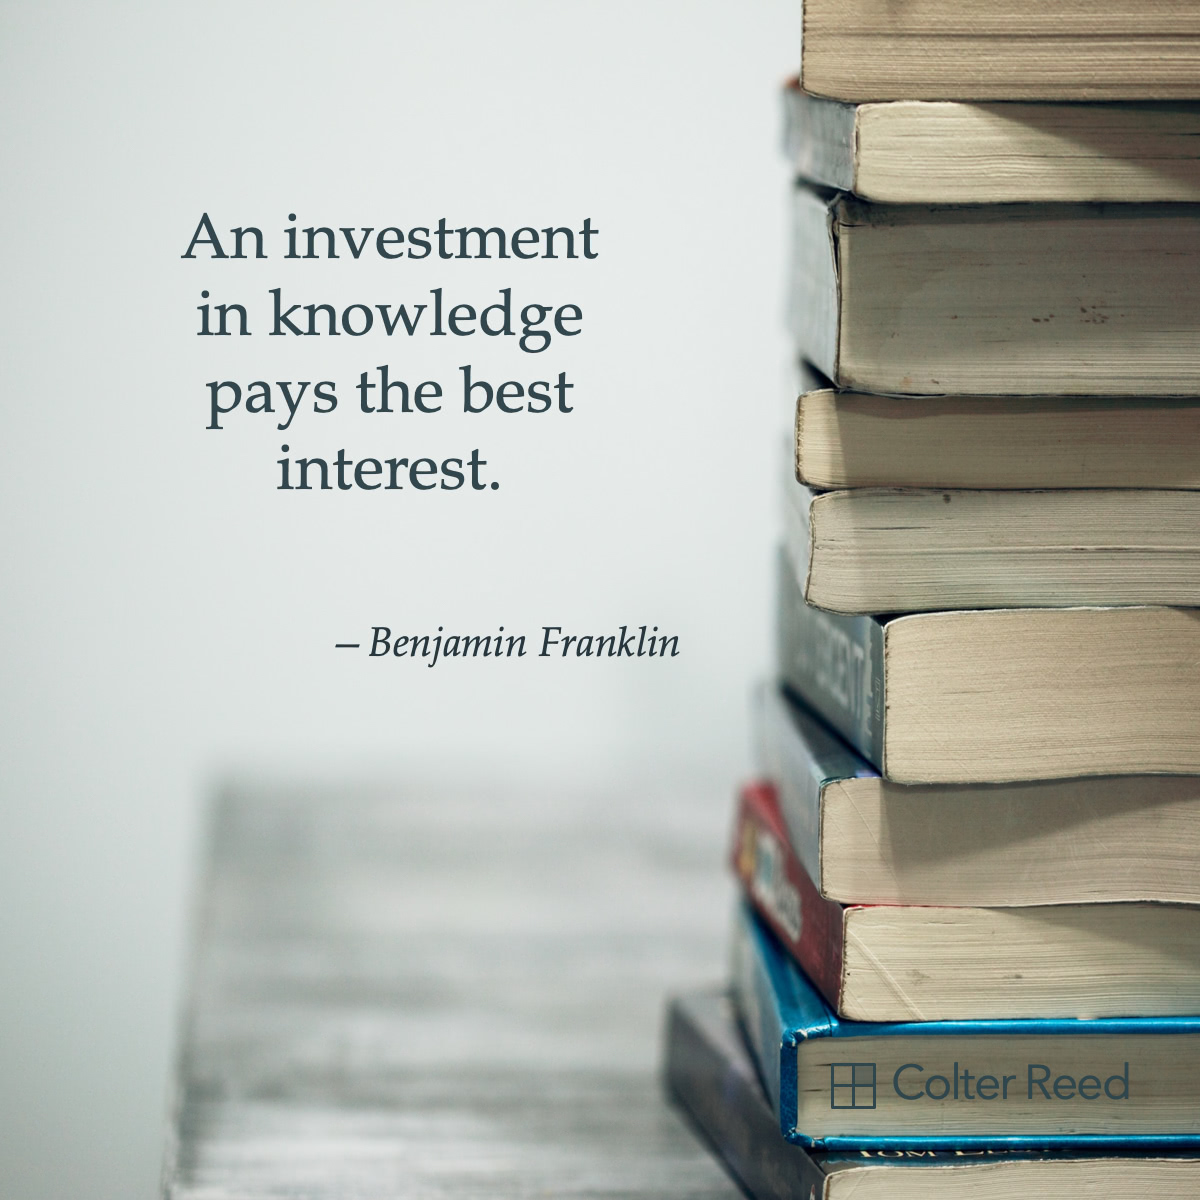 An investment in knowledge pays the best interest. —Benjamin Franklin